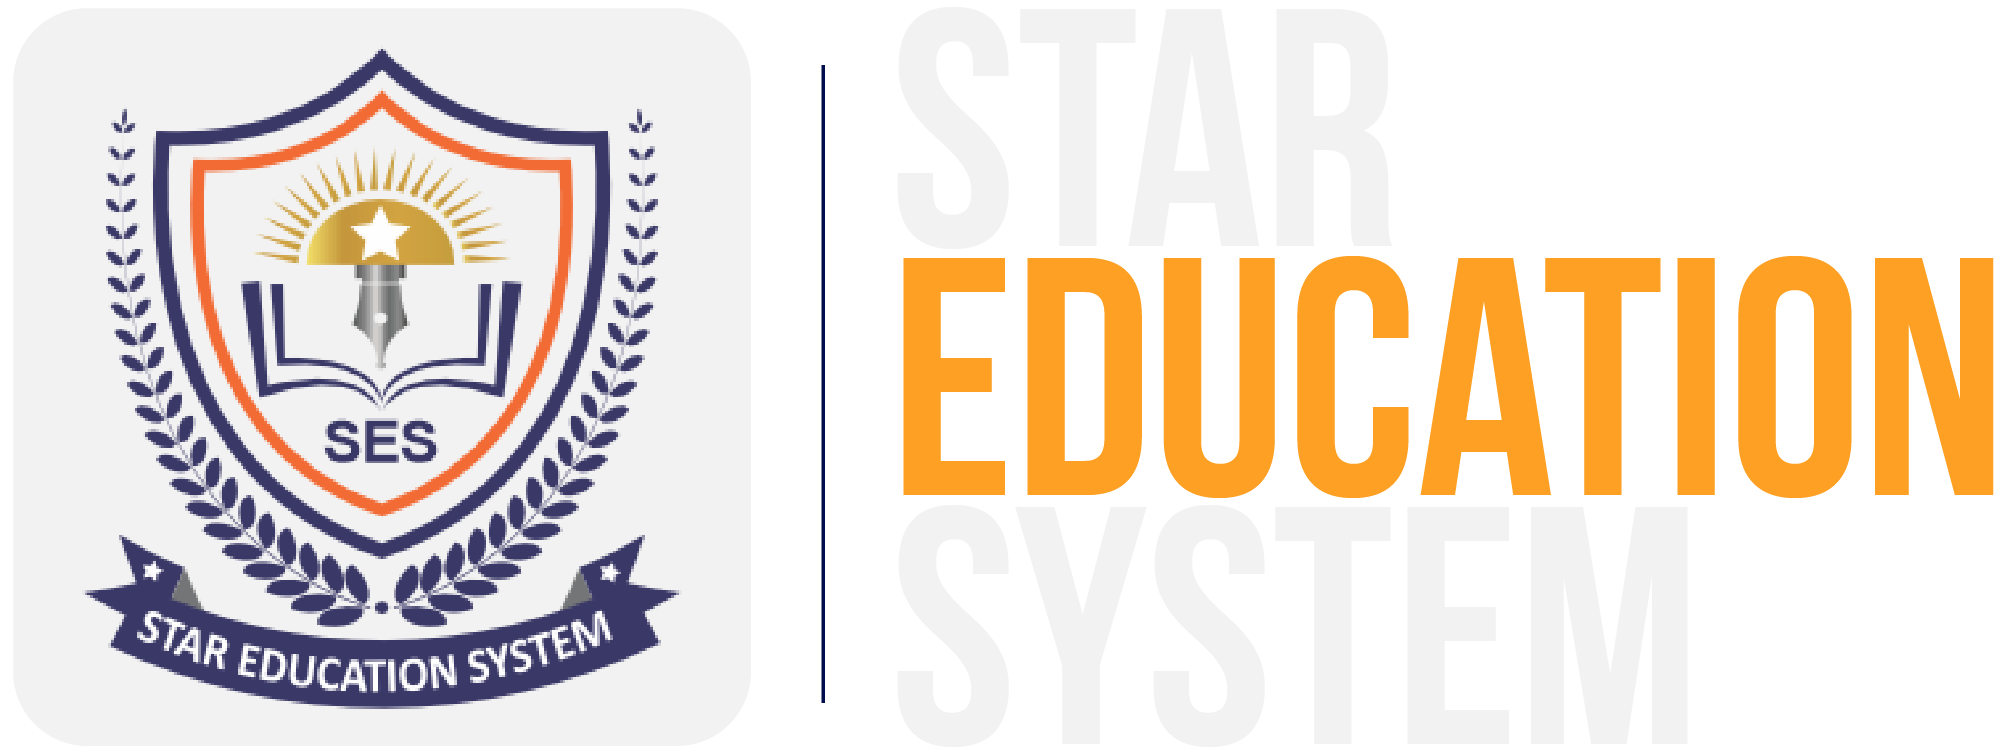 project star education